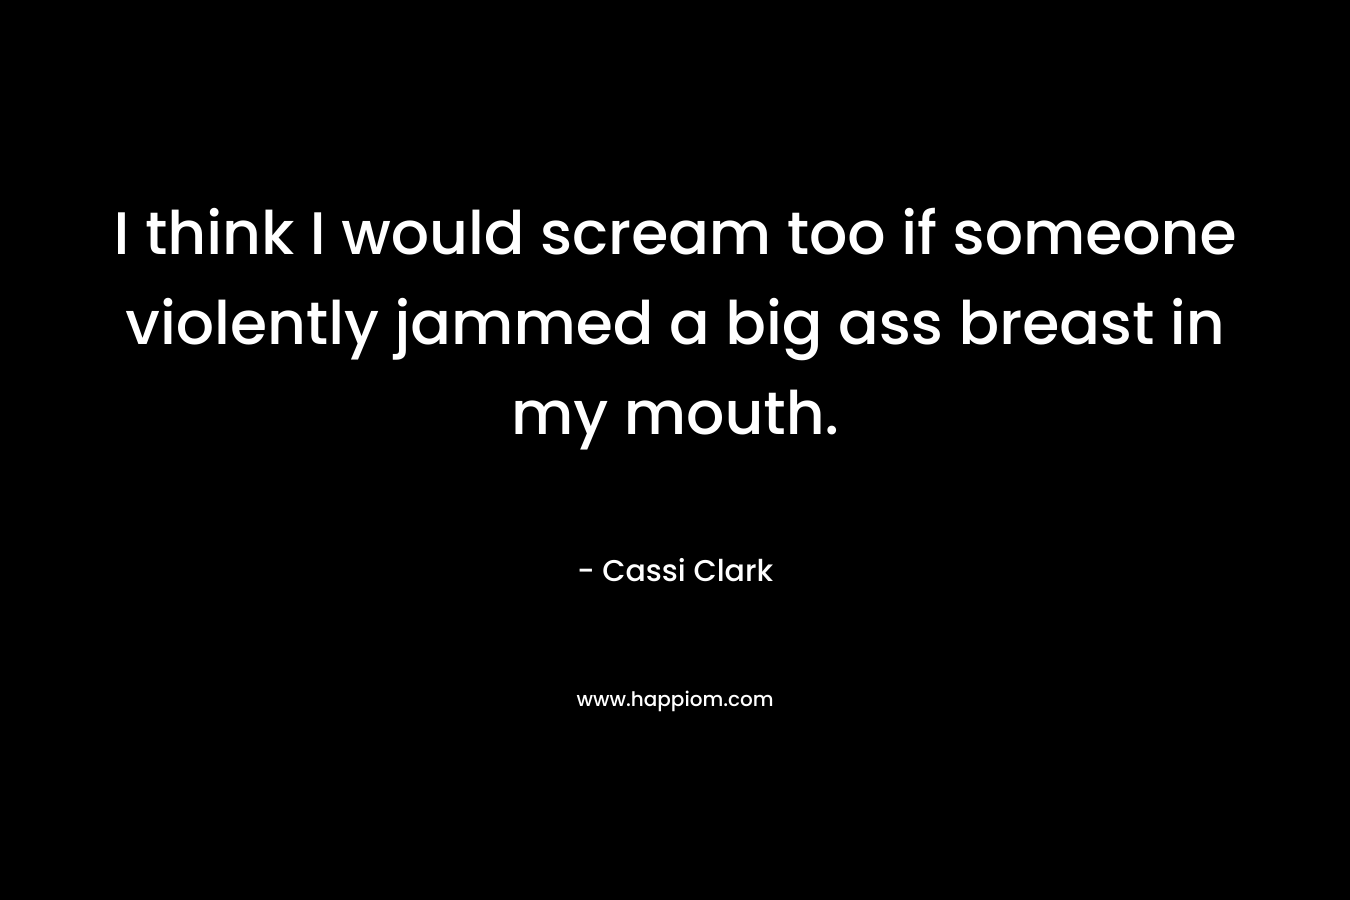 I think I would scream too if someone violently jammed a big ass breast in my mouth.